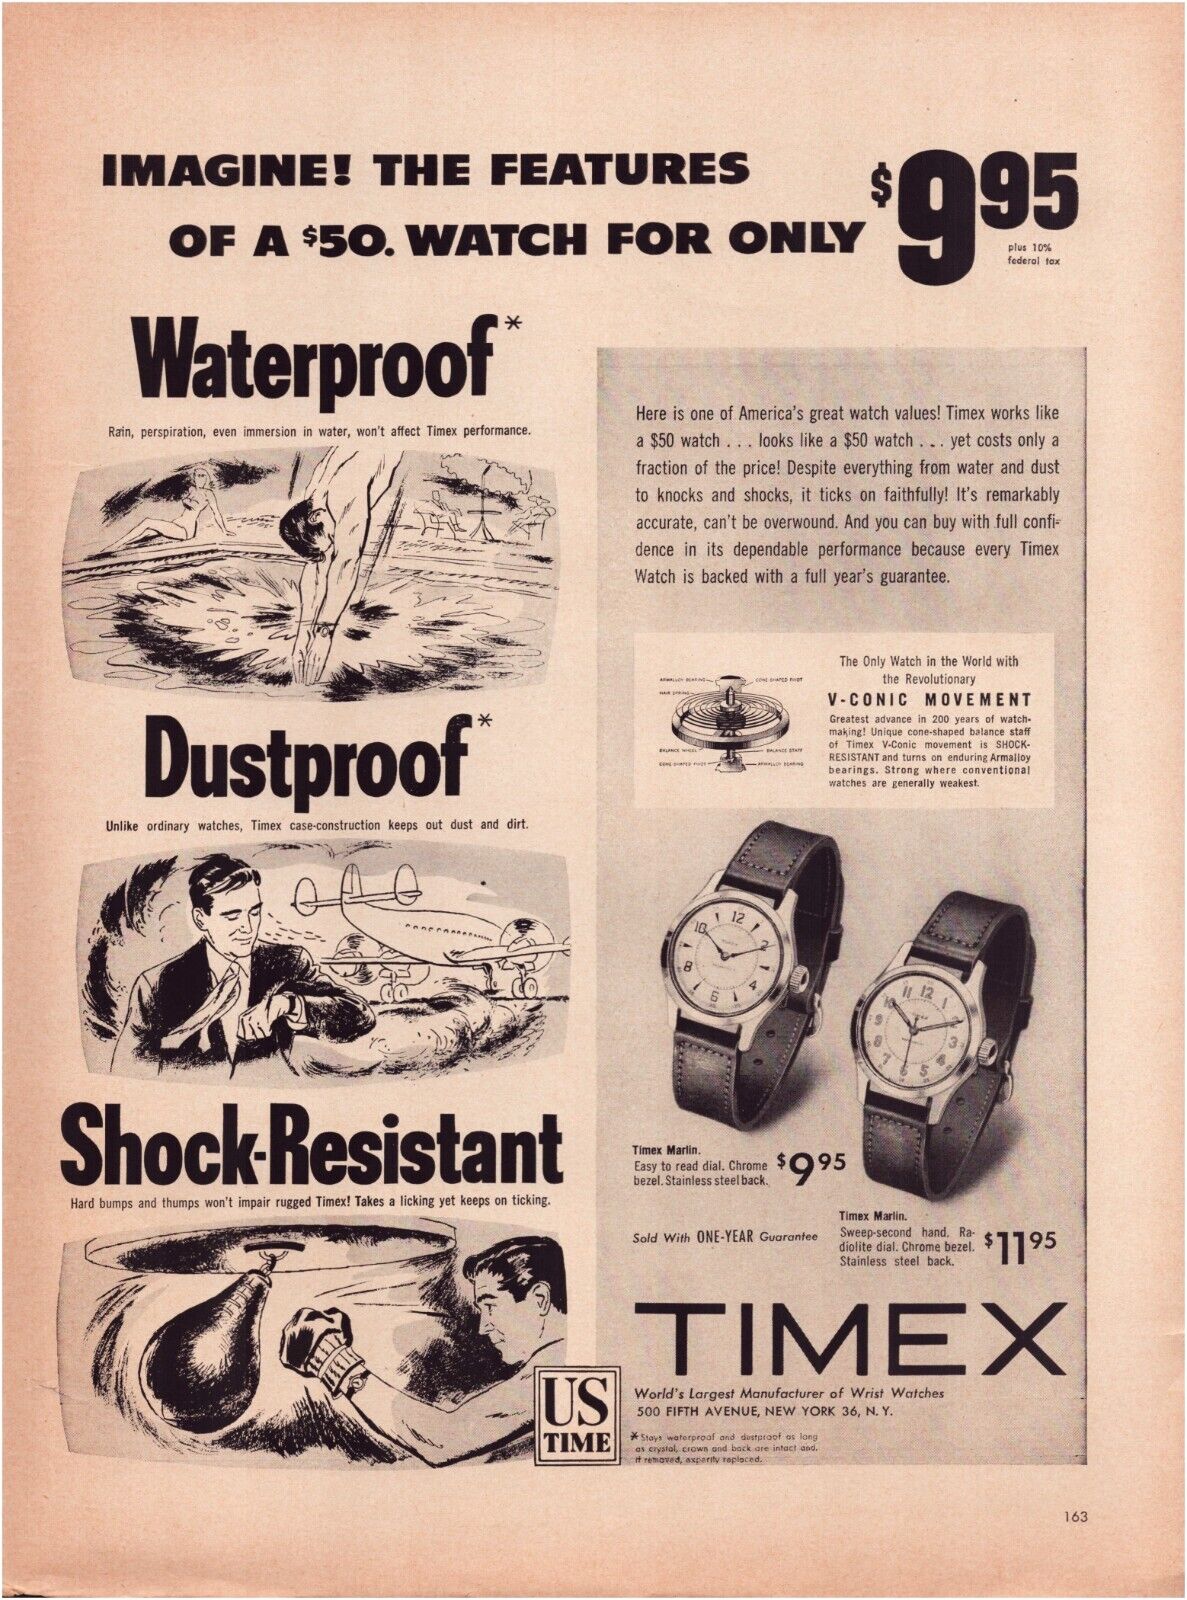 Print Ad Timex Watch 1953 Full Page Large Magazine 10.5\